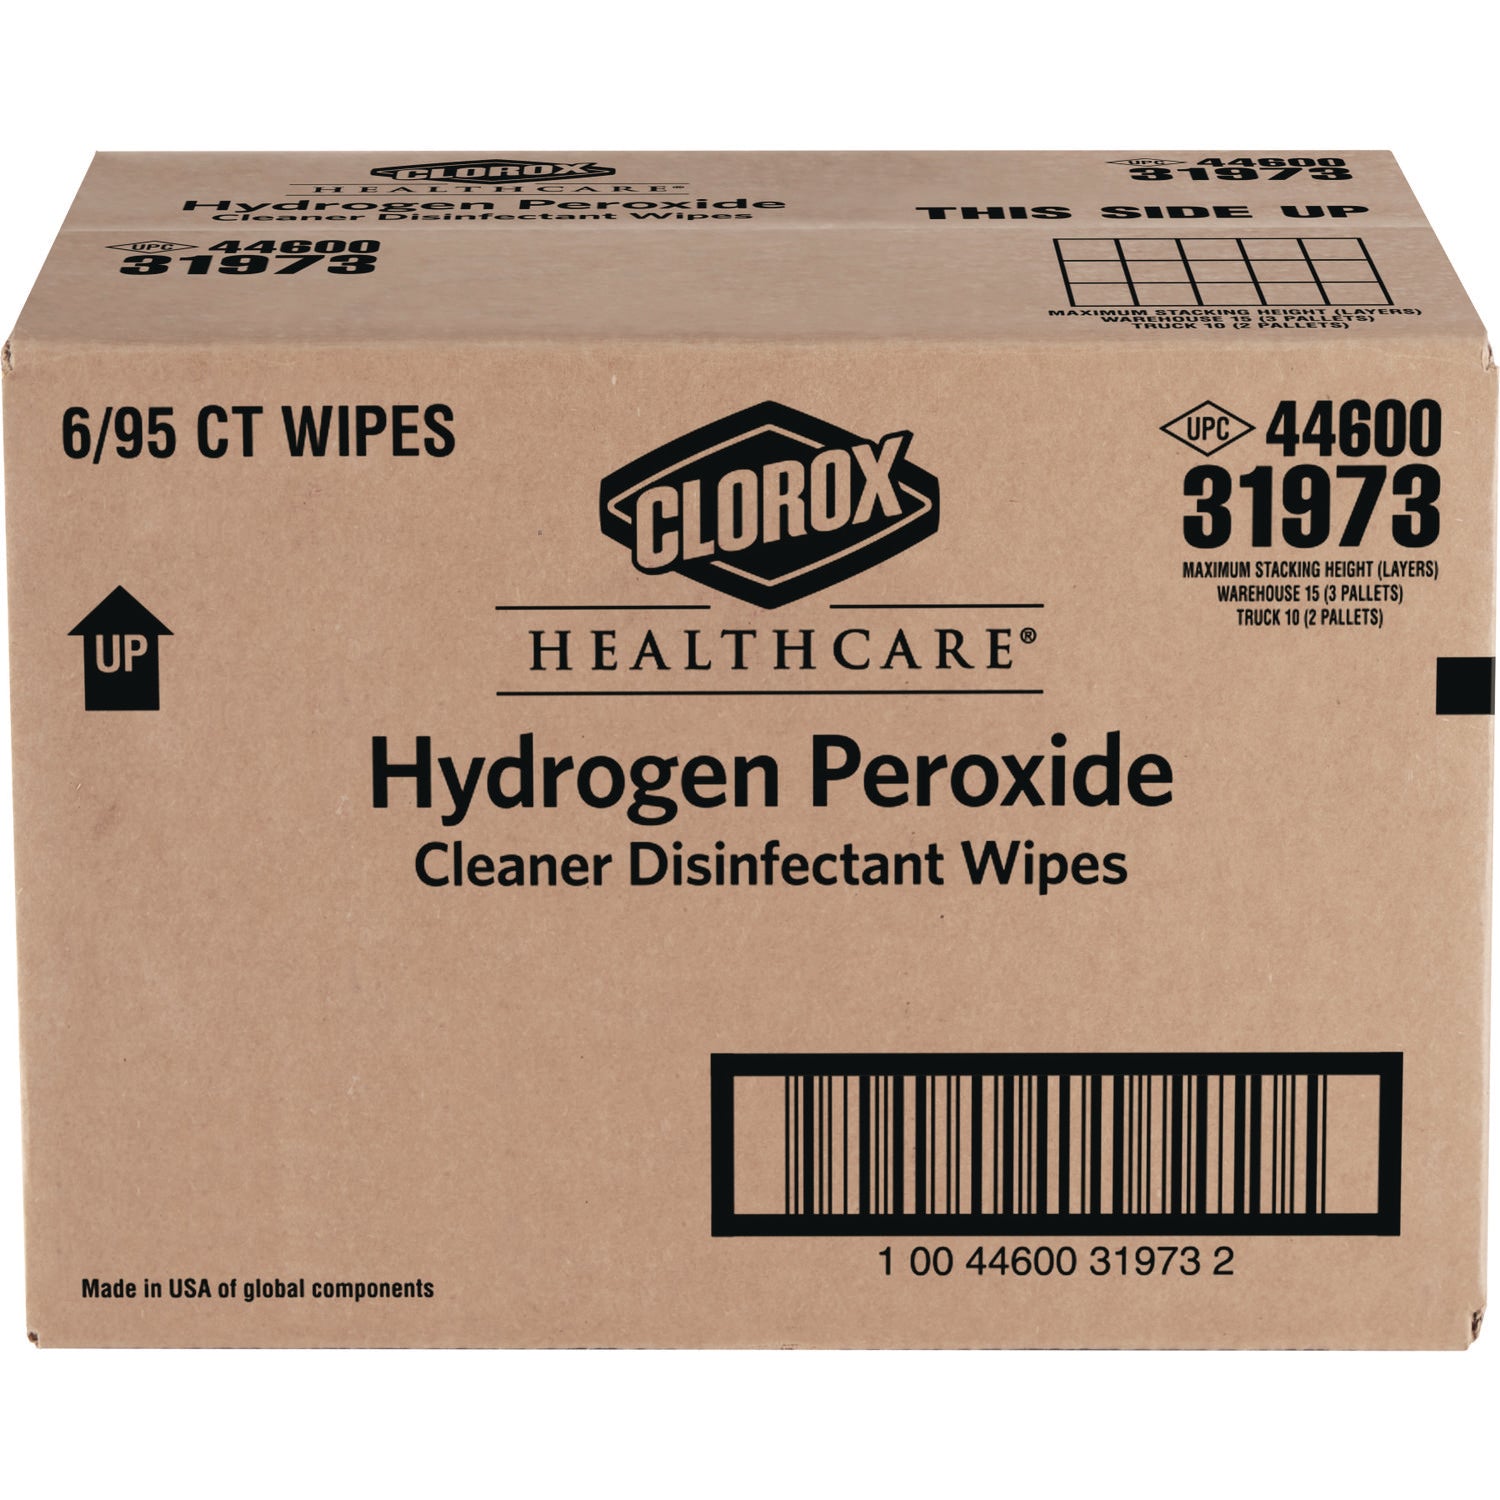 Hydrogen Peroxide Cleaner Disinfectant Wipes, 9 x 6.75, Unscented, White, 95/Canister, 6 Canisters/Carton - 3